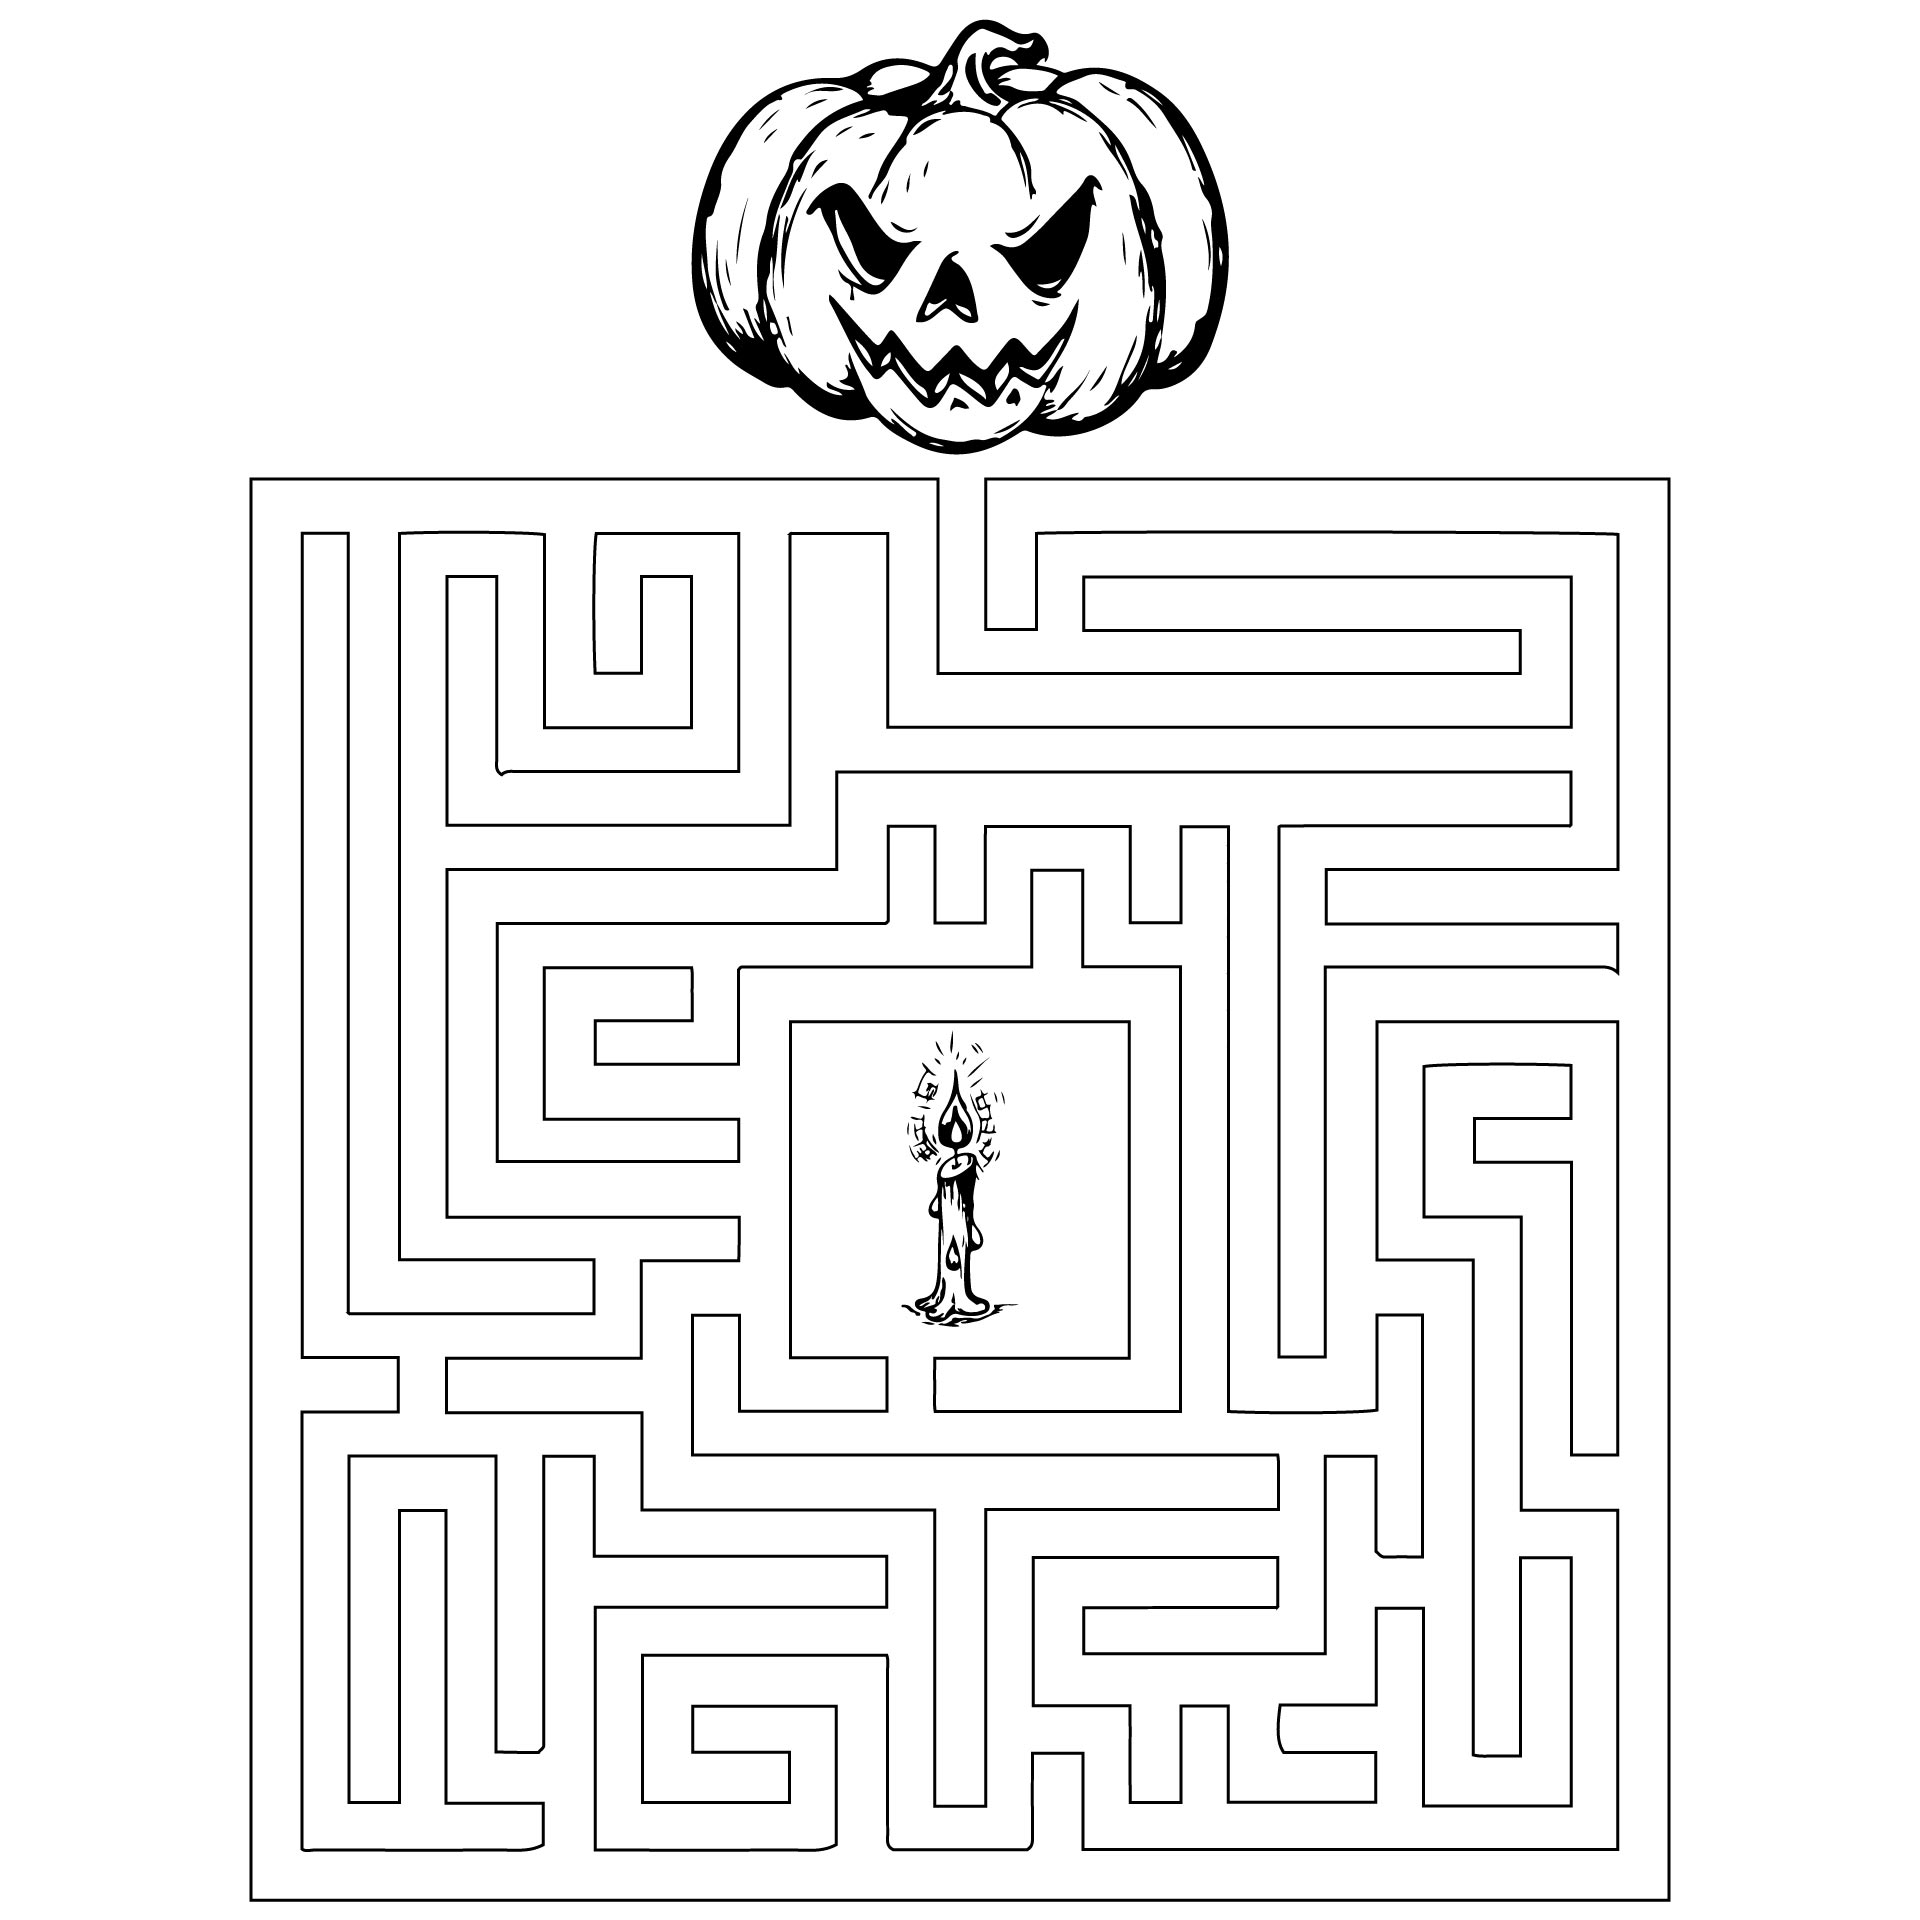 4-best-images-of-scary-halloween-mazes-printable-haunted-house-maze